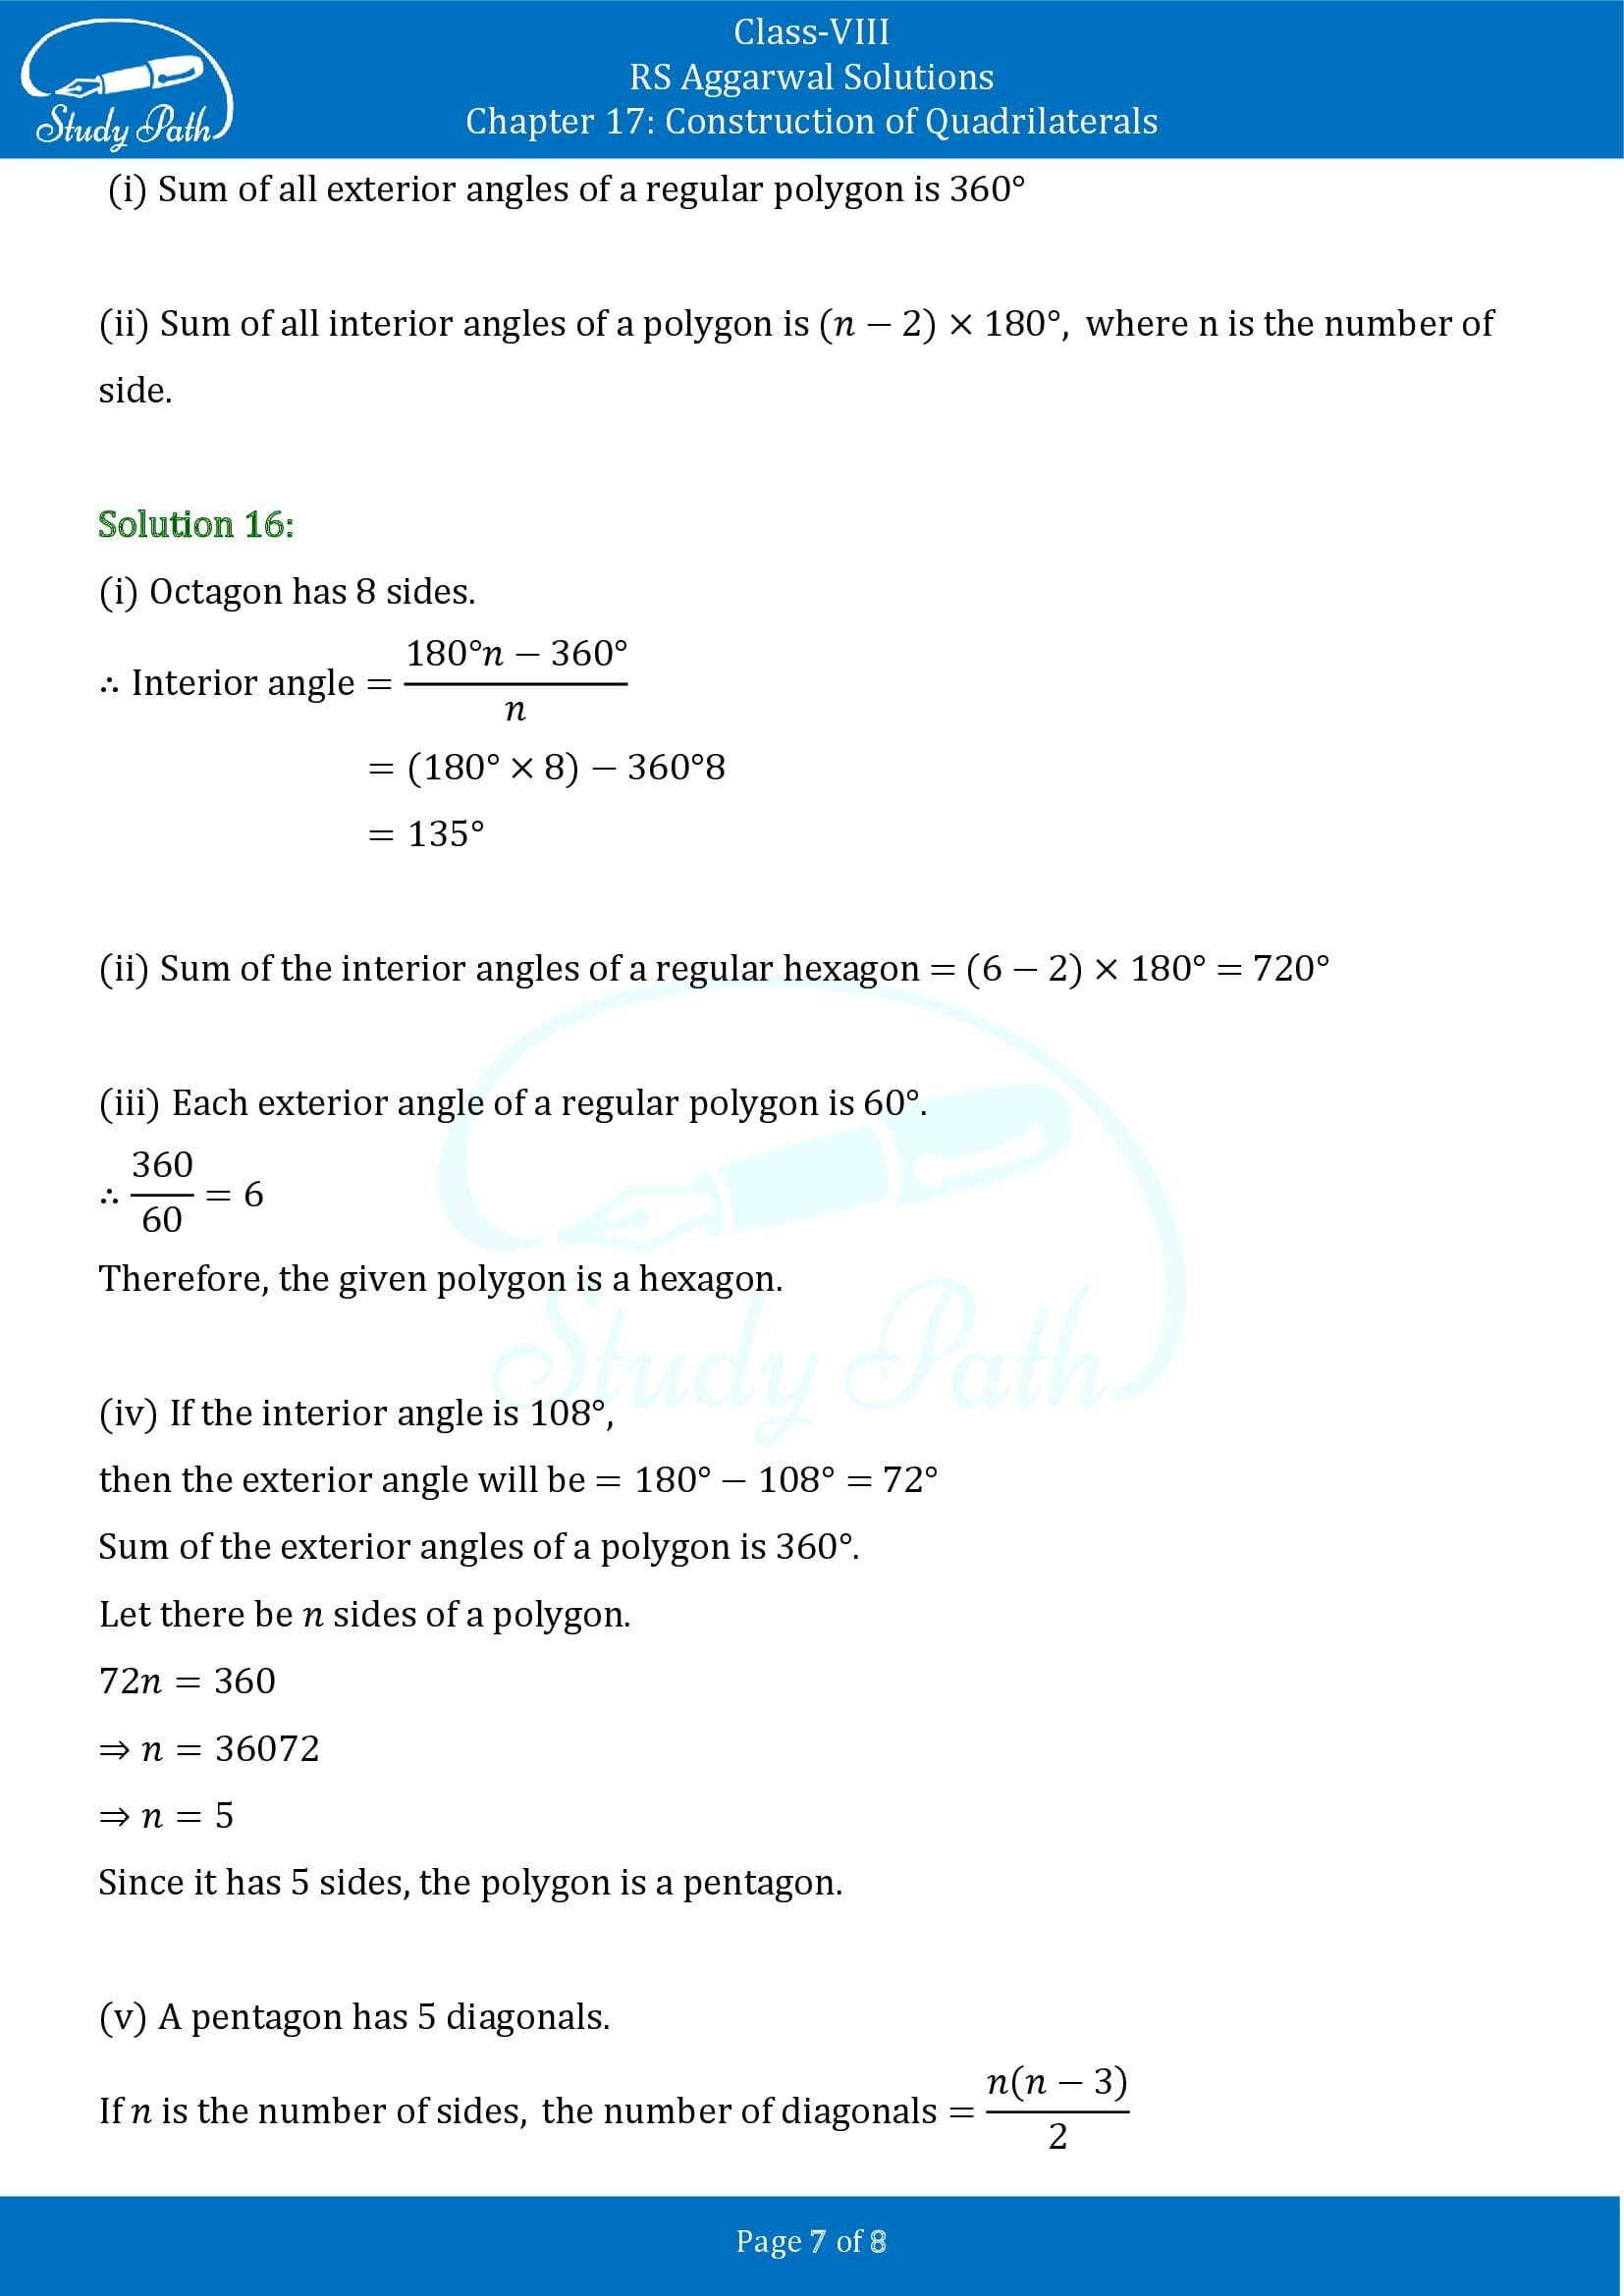 RS Aggarwal Solutions Class 8 Chapter 17 Construction of Quadrilaterals Test Paper 0007